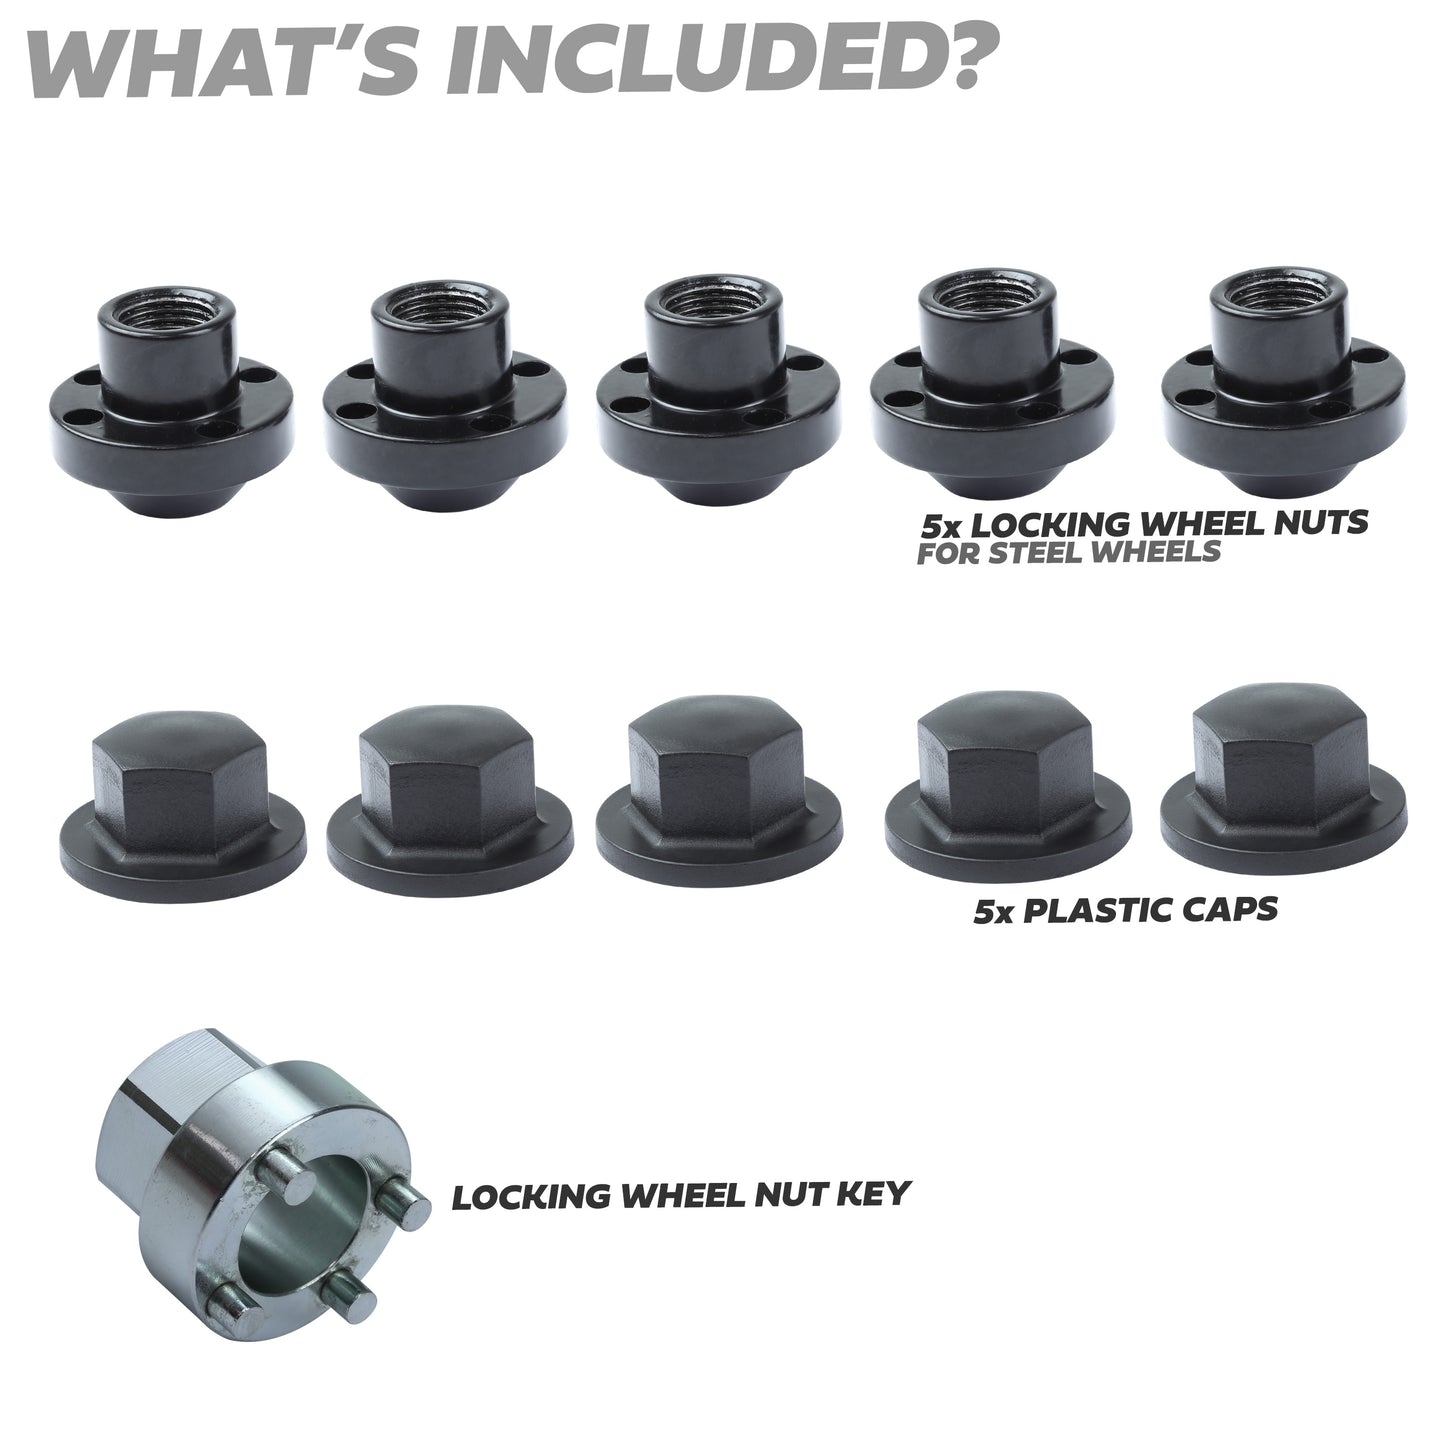 Locking Wheel Nut Kit for Land Rover Discovery 1 Steel Wheels